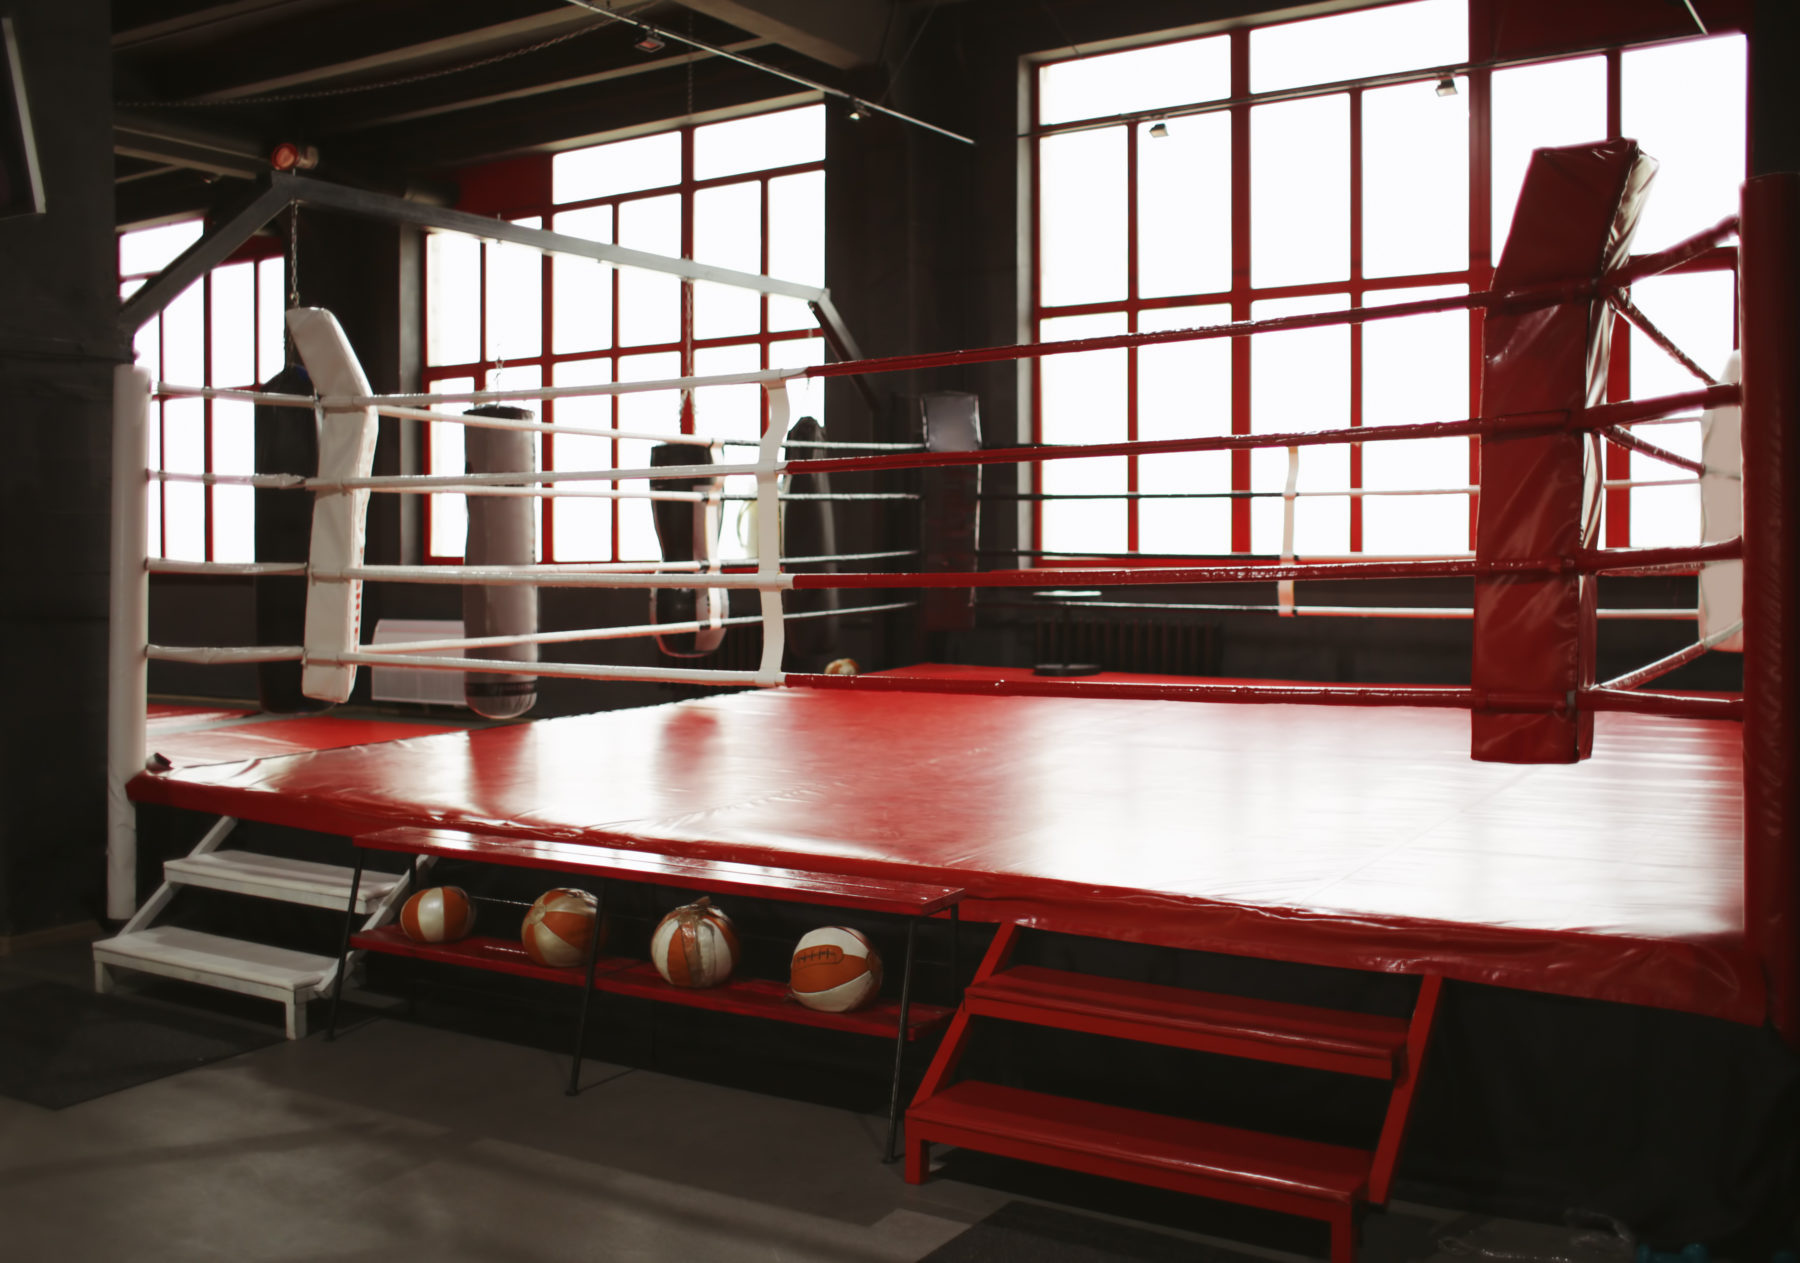 view-on-boxing-ring-in-gym